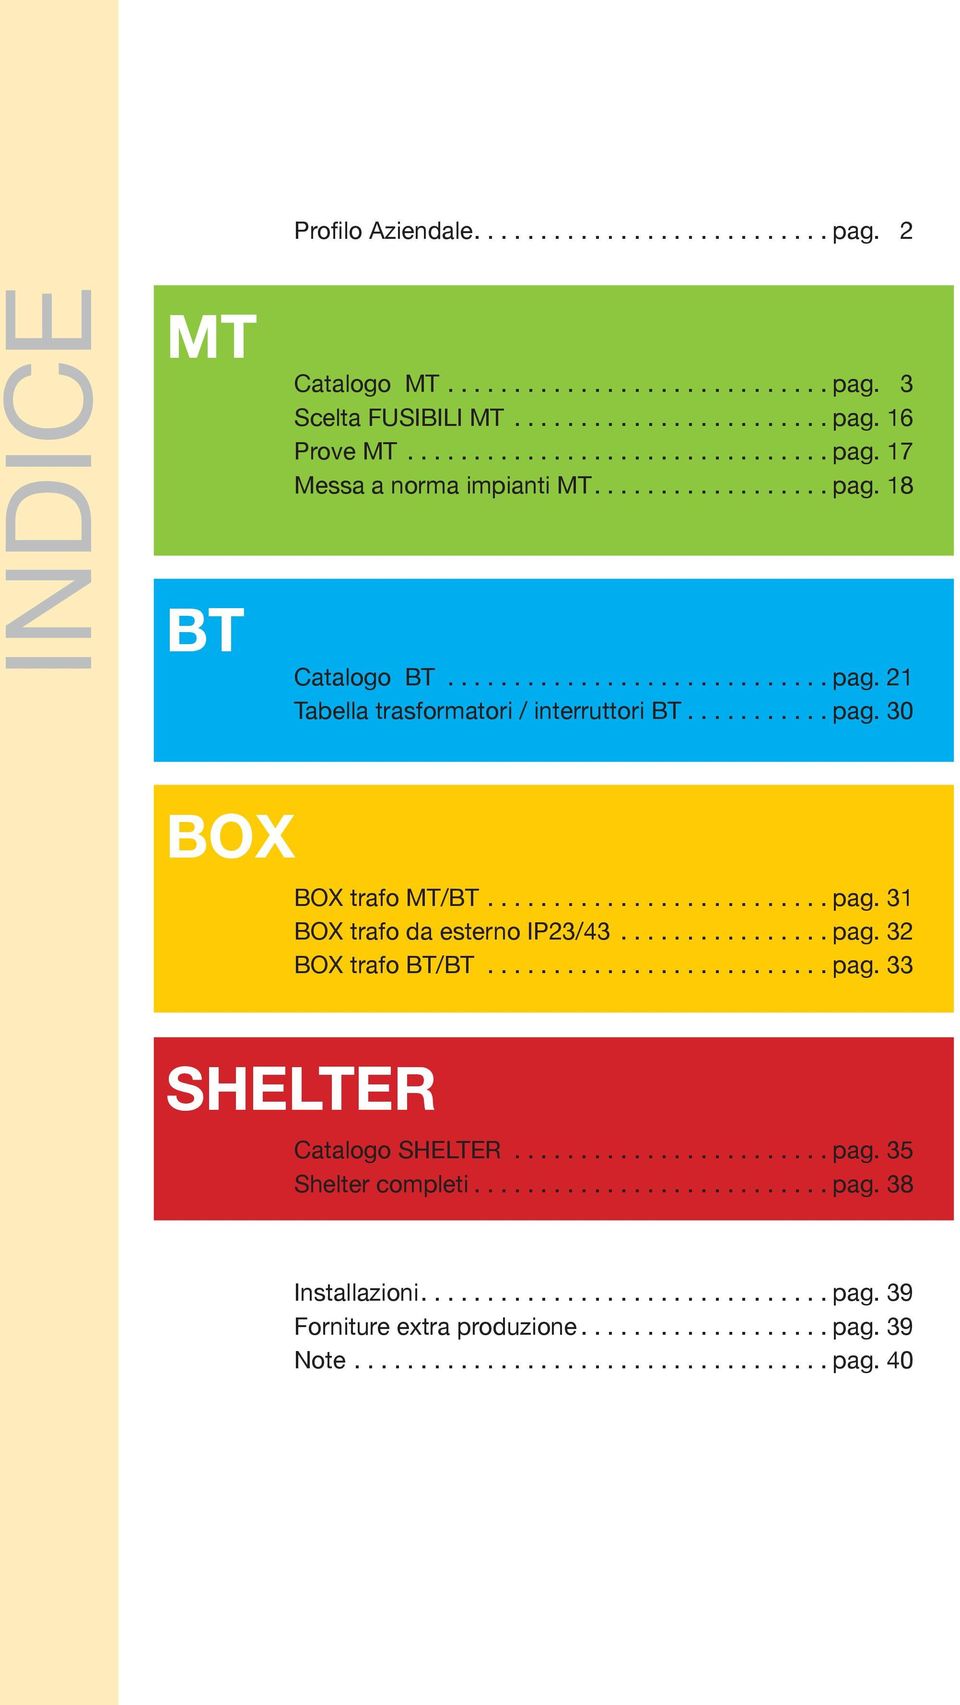 .. pag. 32 BOX trafo BT/BT... pag. 33 SHELTER Catalogo SHELTER... pag. 35 Shelter completi... pag. 38 Installazioni.